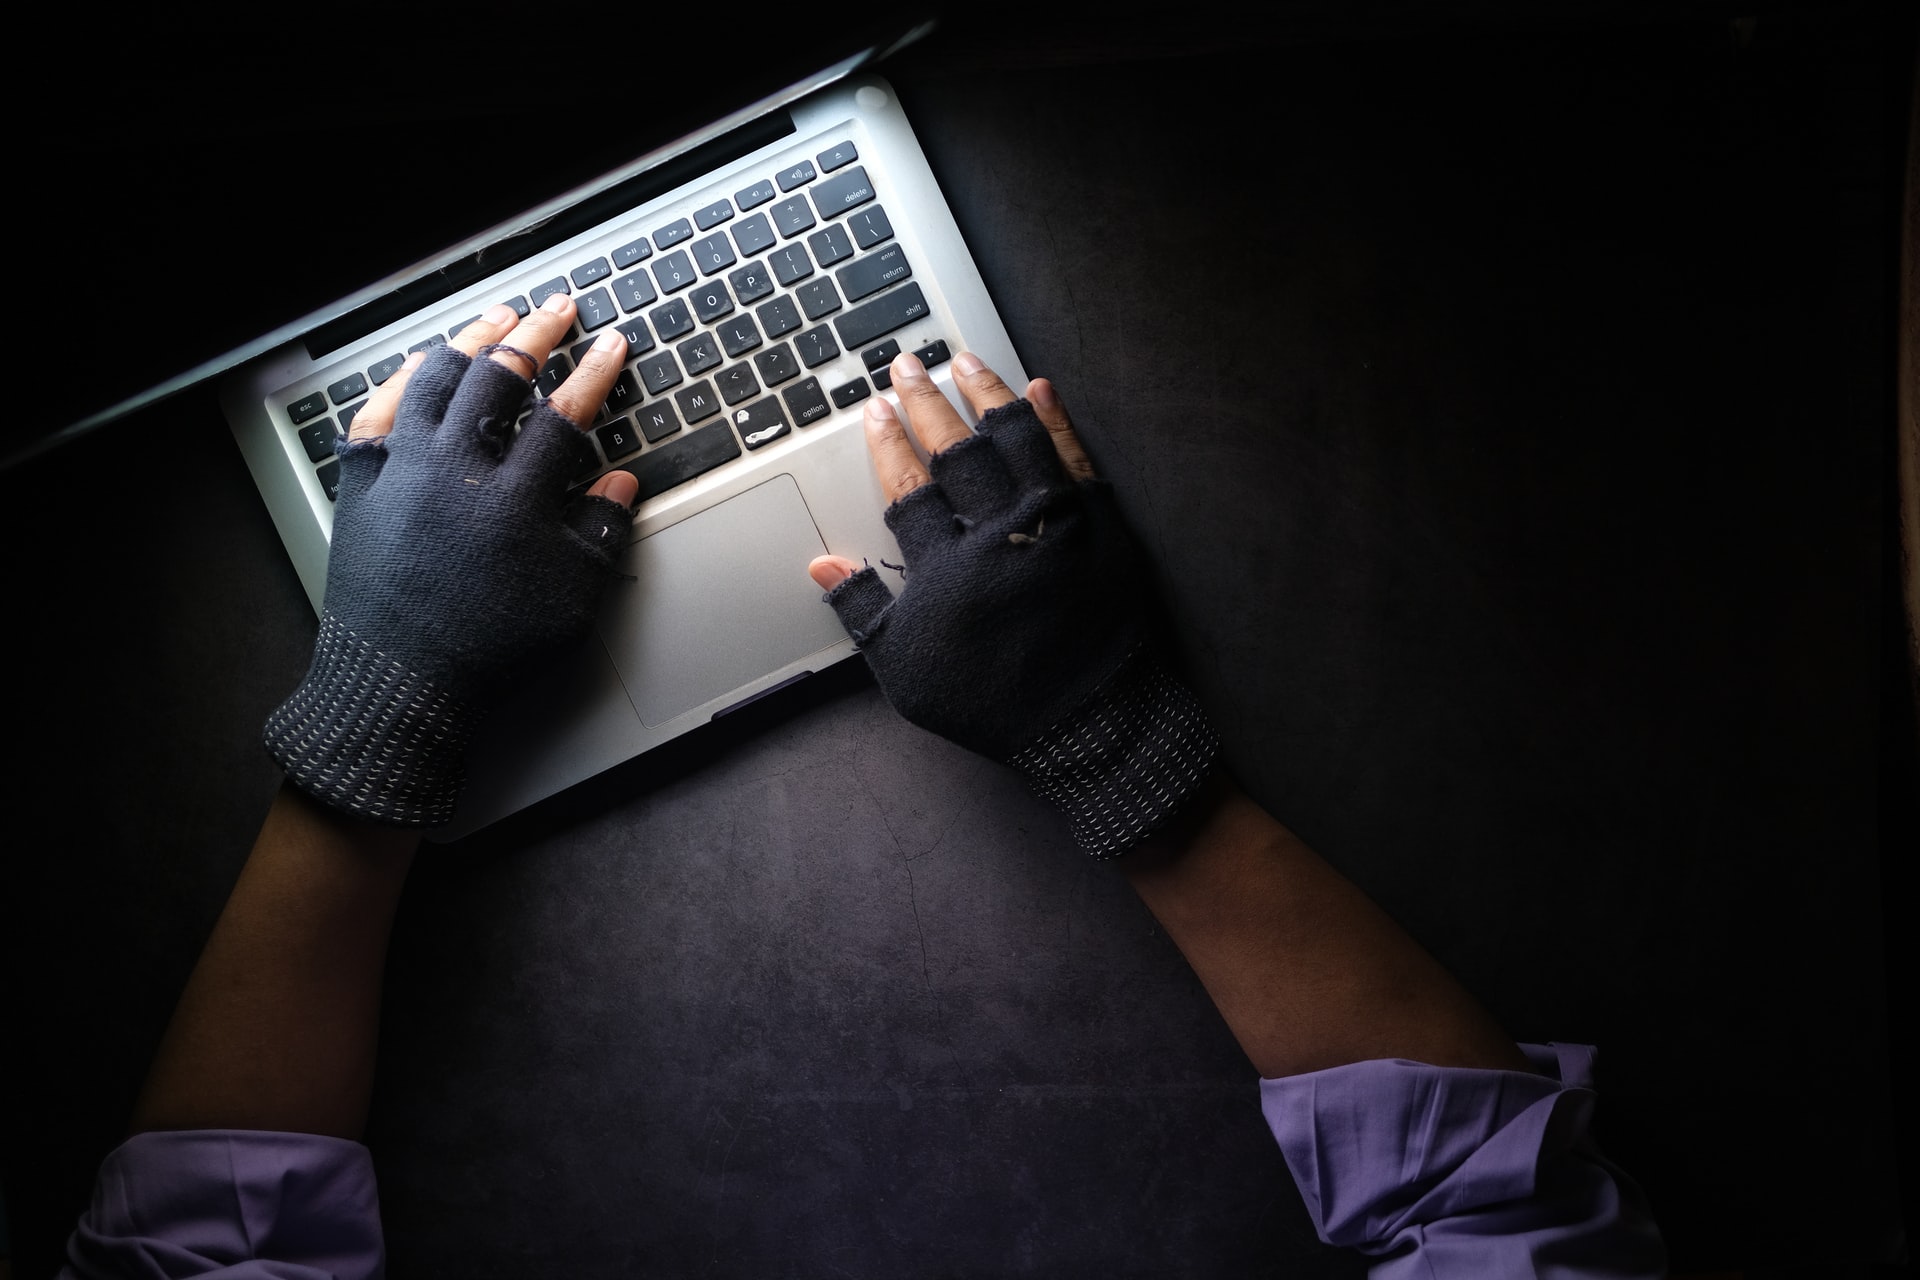 A pair of hands typing on a laptop in a dark room